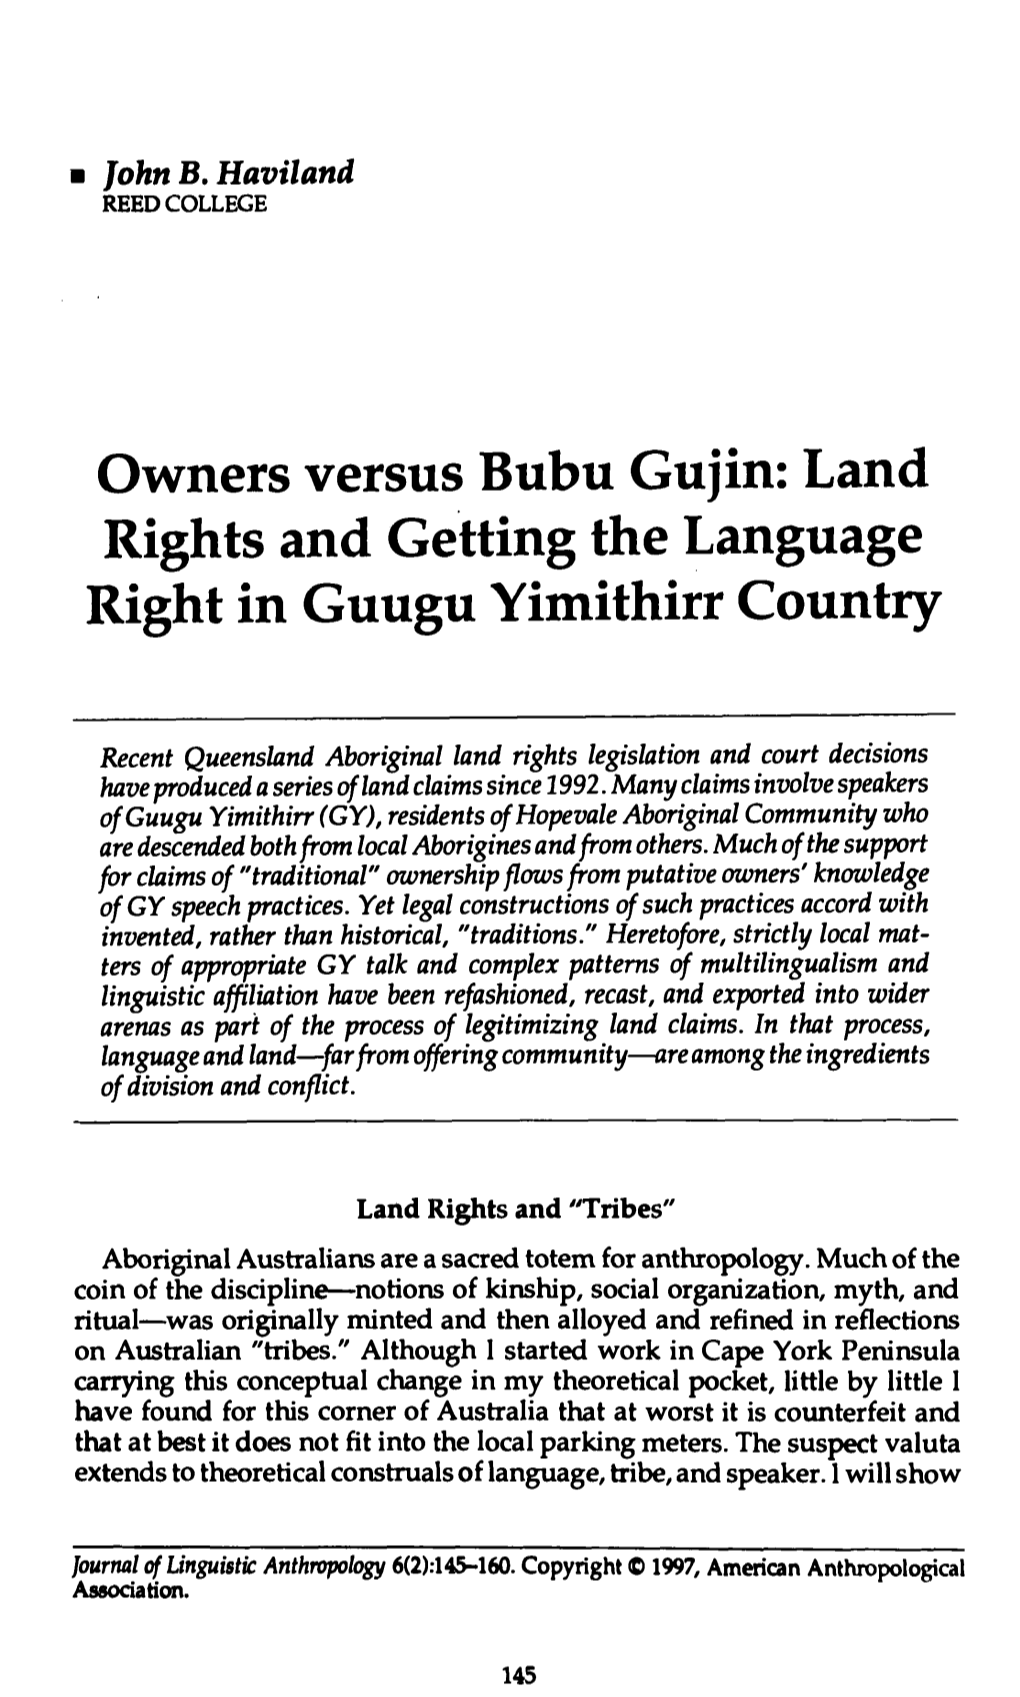 Owners Versus Bubu Gujin: Land Rights and Getting the Language Right in Guugu Yimithirr Country